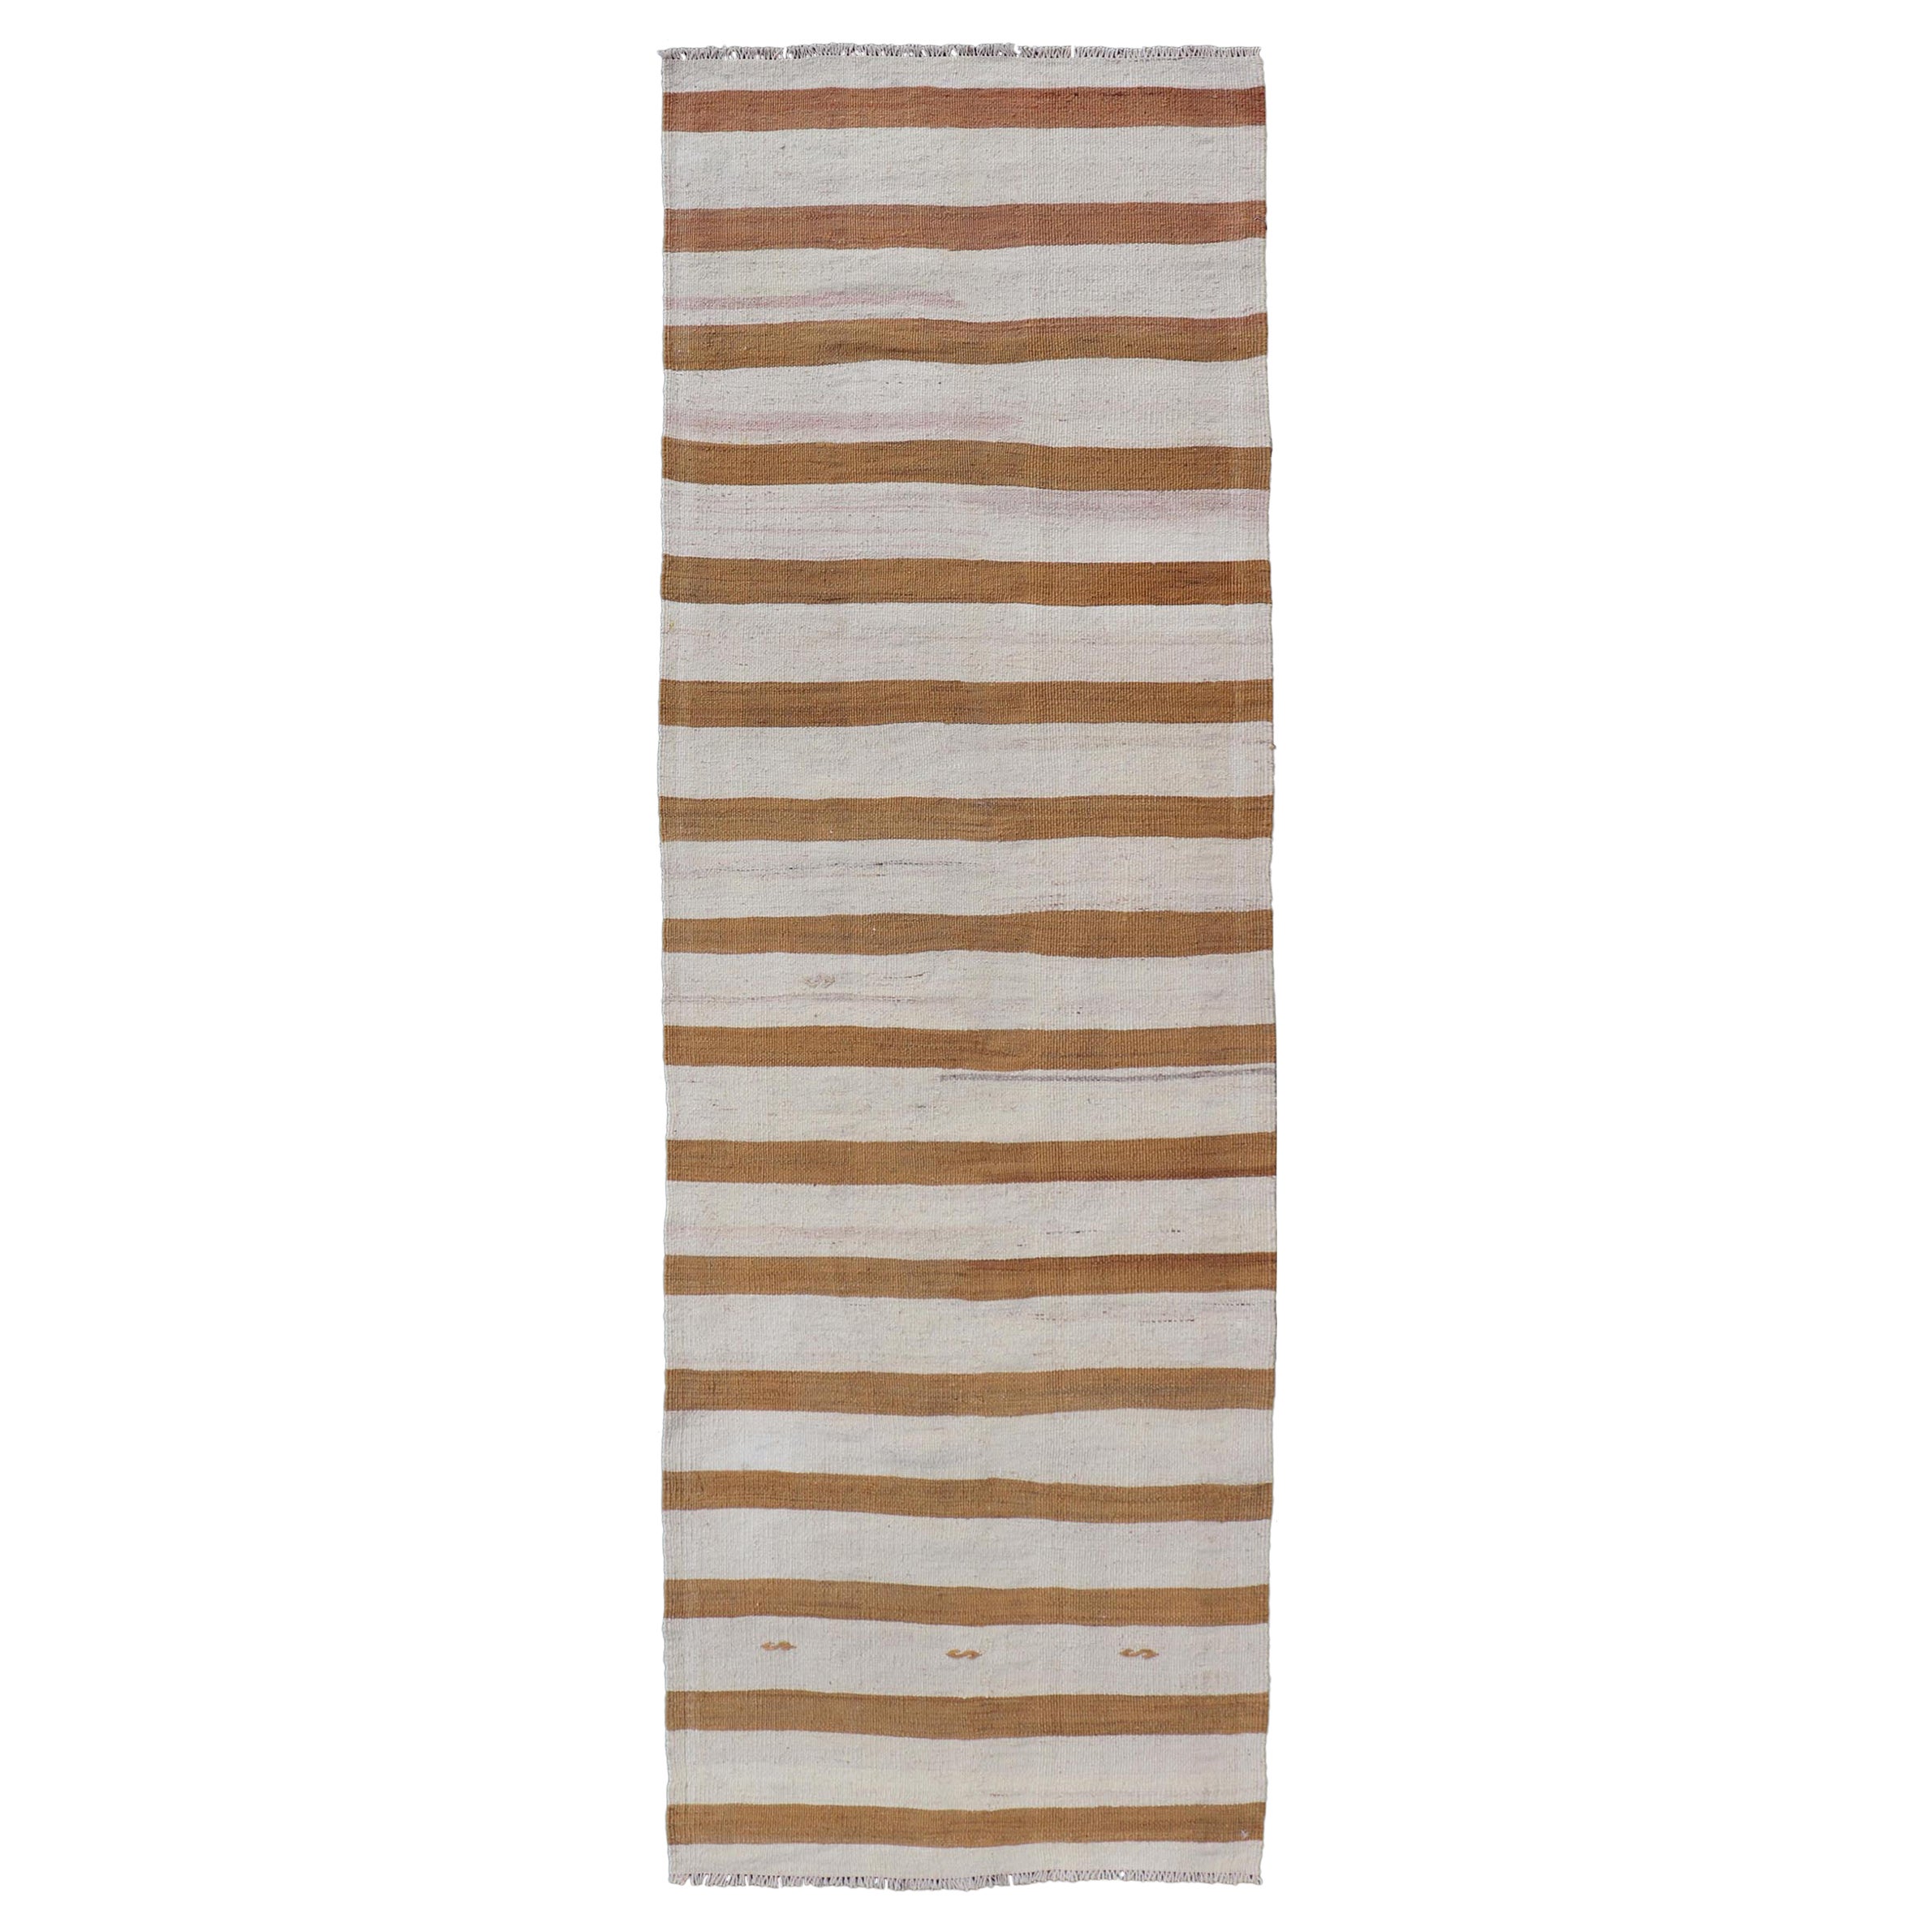 Vintage Turkish Kilim Rug with Horizontal Stripes in Light Brown and Cream For Sale